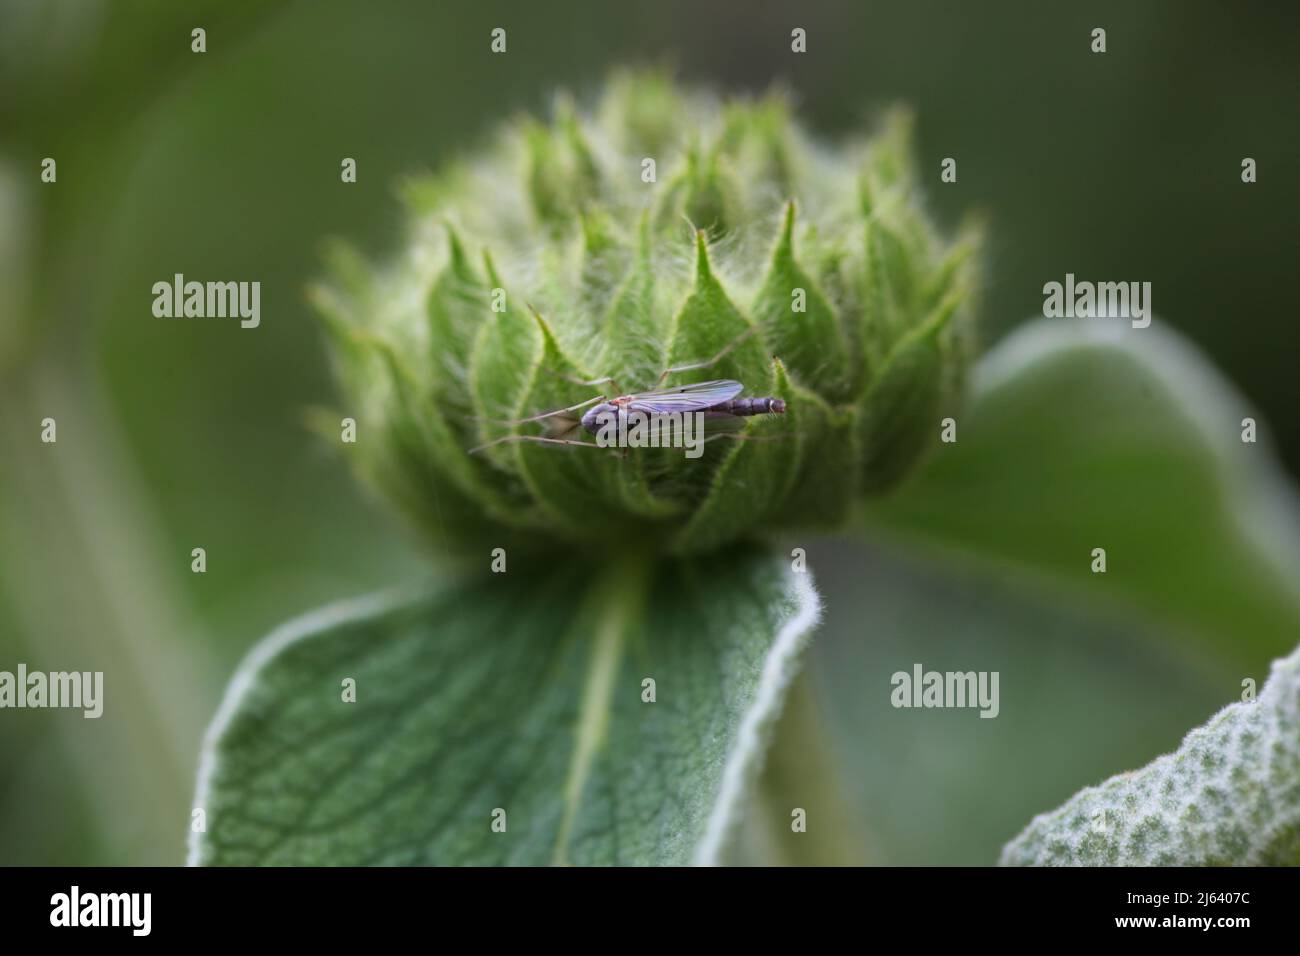 Winged Insect rests dormant in the Silvery-velvet foliage of a Jerusalem Sage Plant , Phlomis fruticosa . Stock Photo